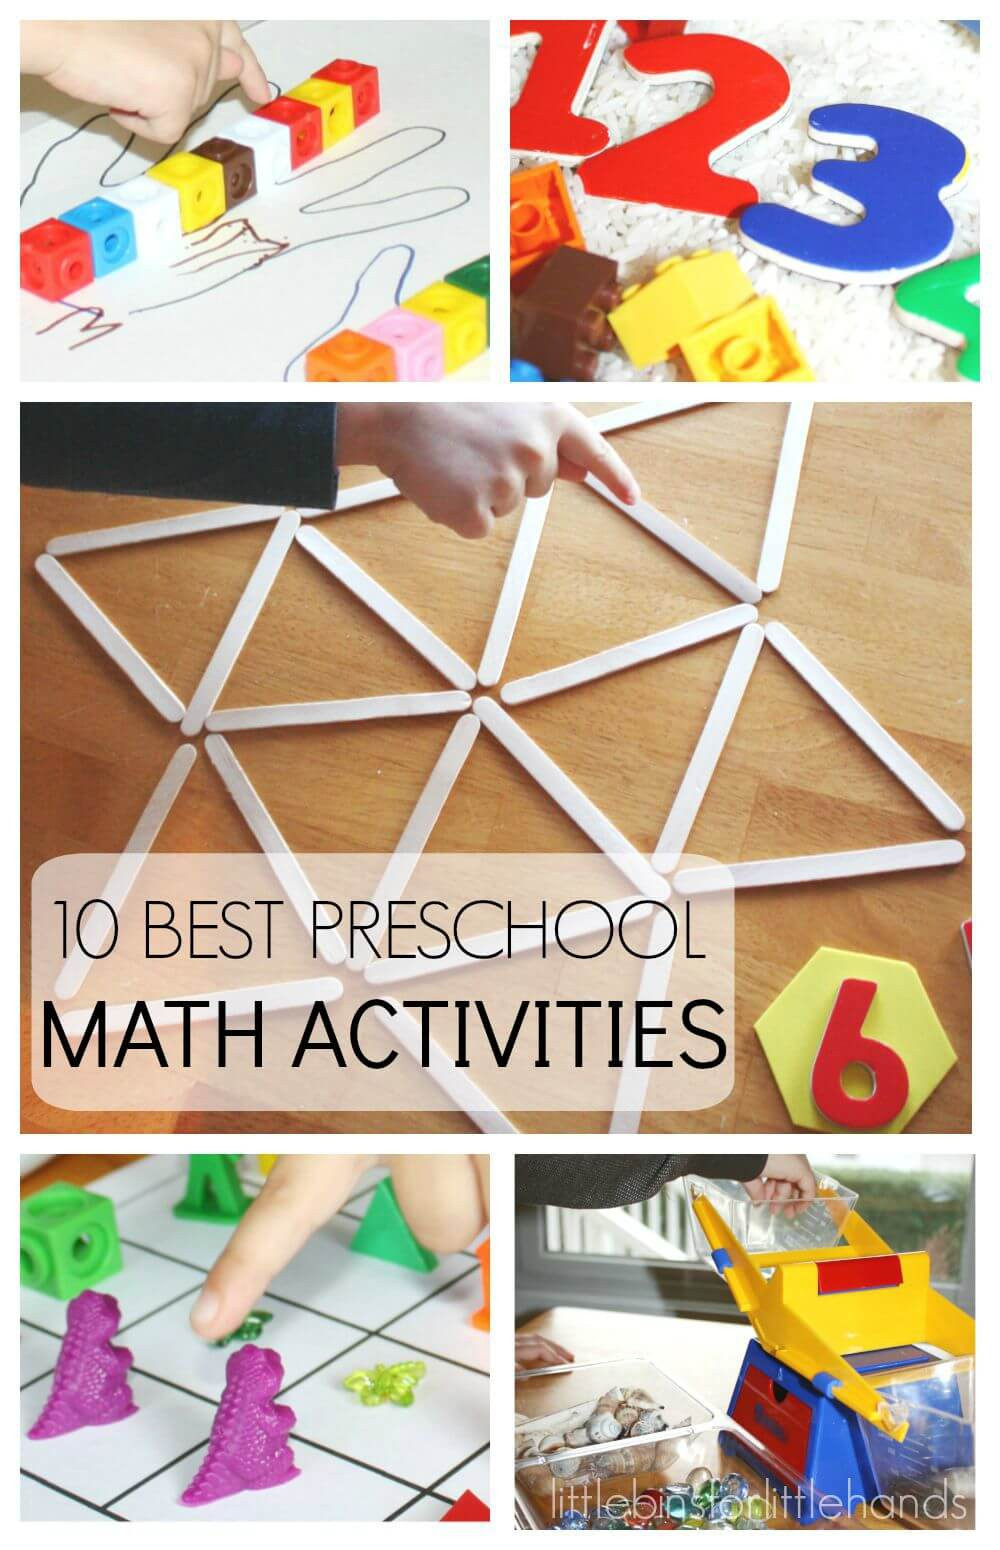 Learning Crafts For Preschoolers
 Preschool Math Activities for Back to School Early Learning